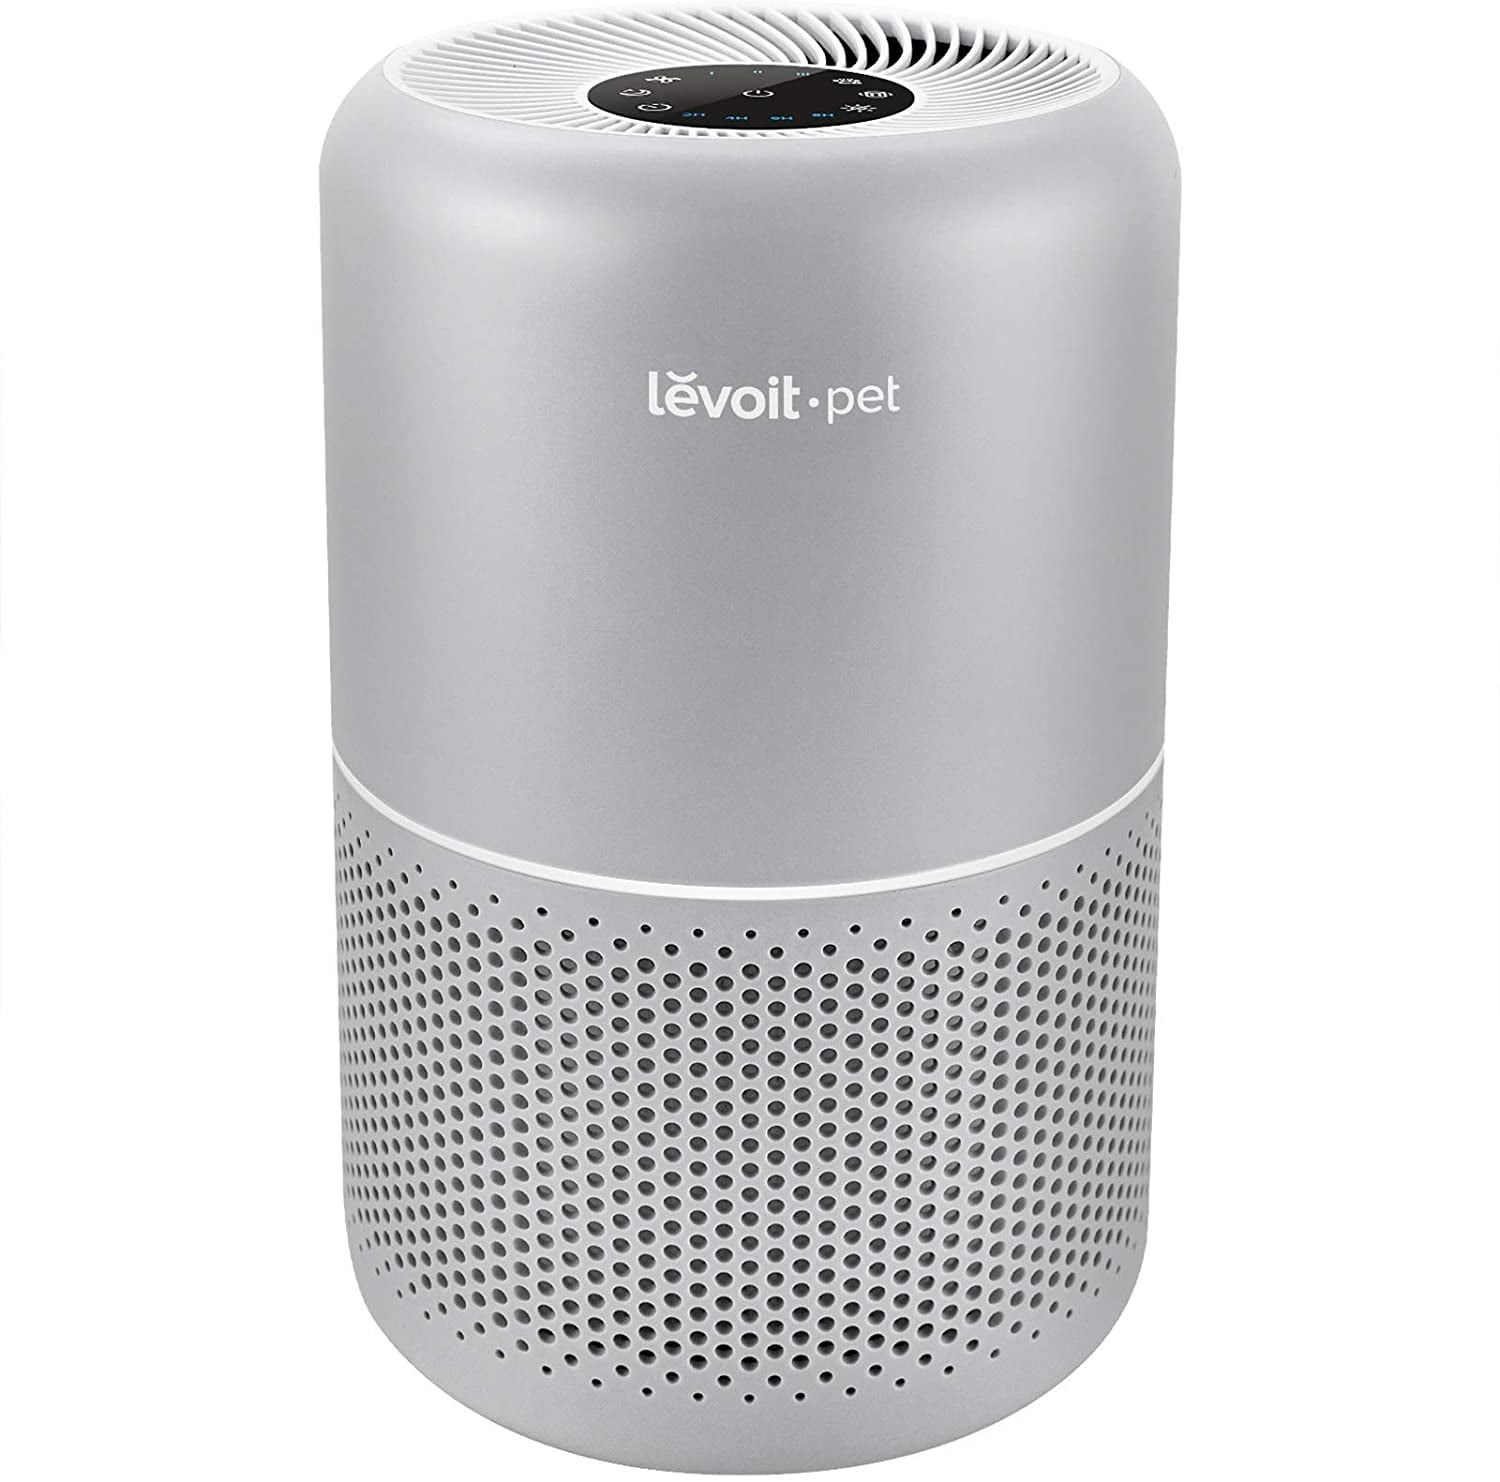 LEVOIT Air Purifier for Home Allergies and Pets Hair with H13 True HEPA  Filter for Bedroom, 24db Filtration System with ARC Formula, Remove 99.97%  